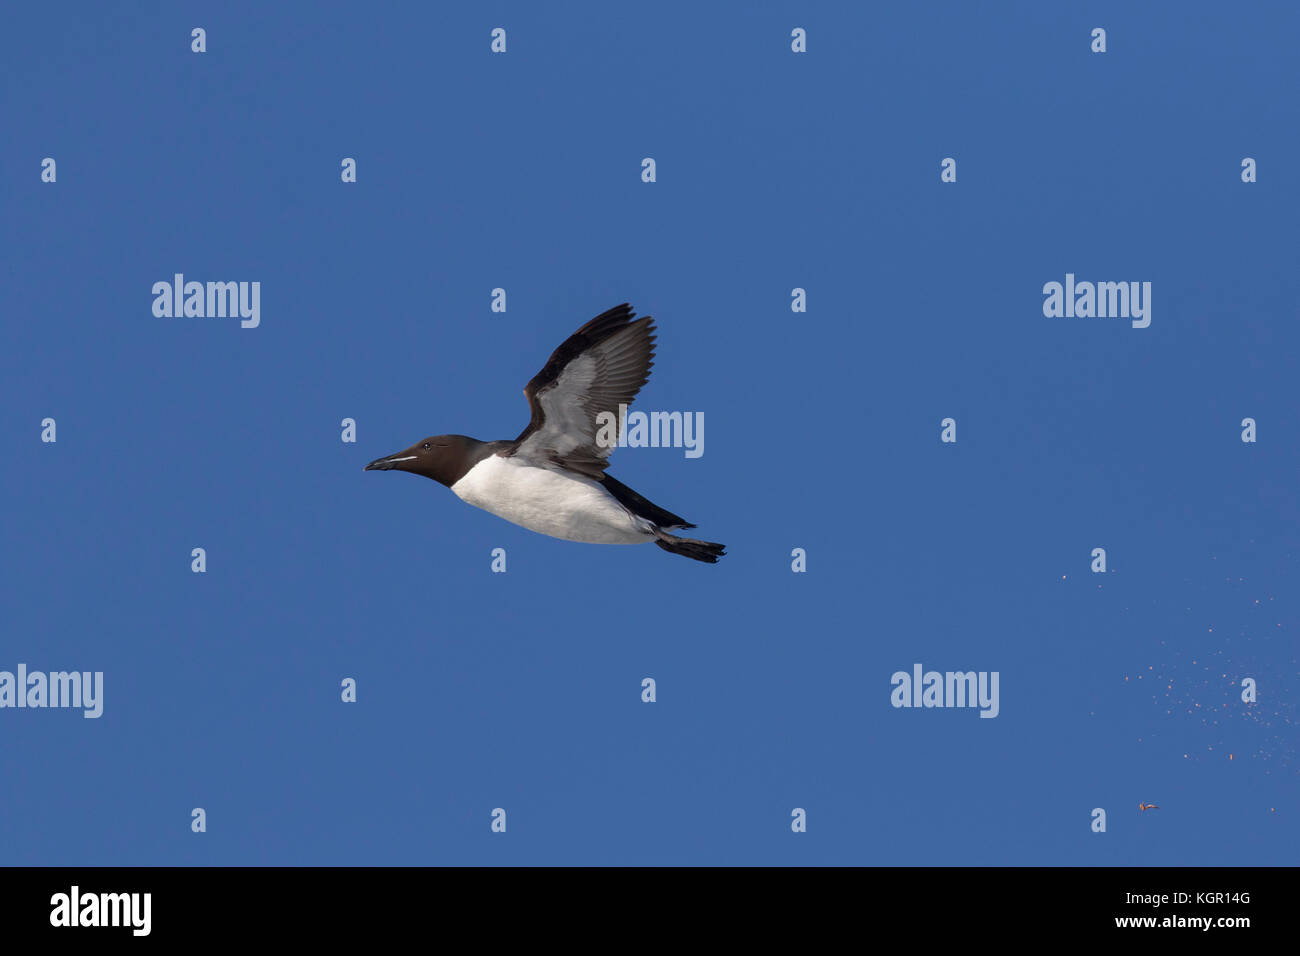 Thick-billed murre / Brünnich's guillemot (Uria lomvia) in flight against blue sky, native to the sub-polar regions of the Northern Hemisphere Stock Photo